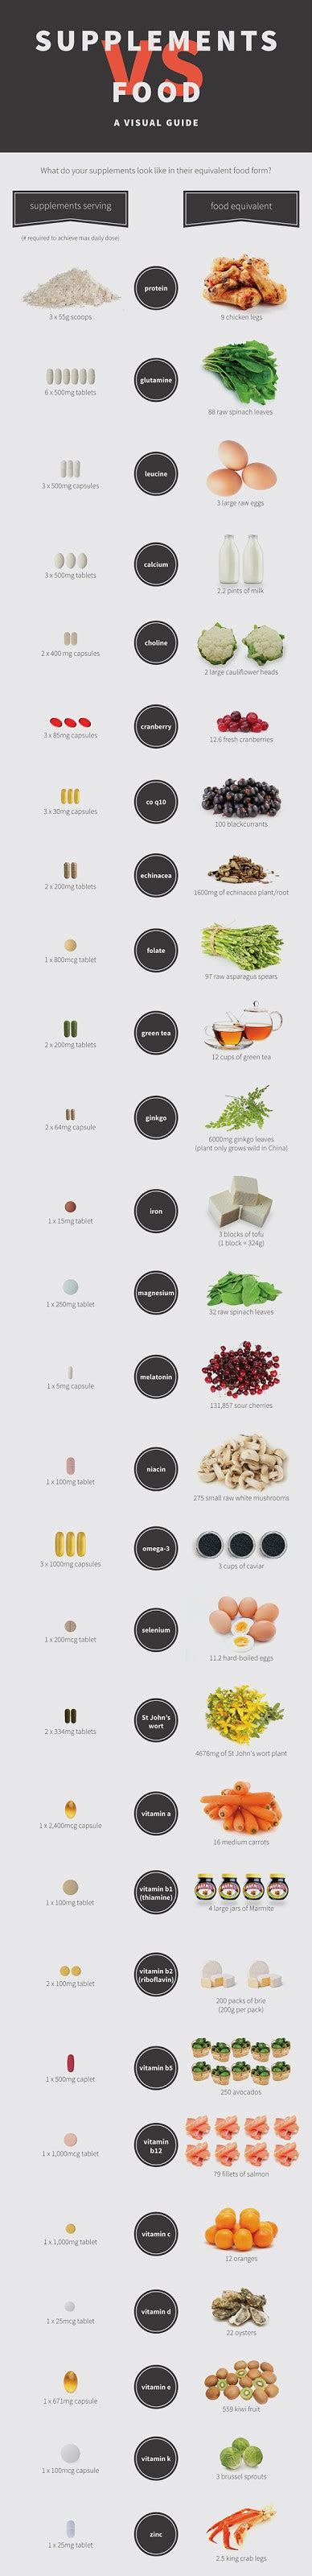 (lb) an angle that, when added to a given angle, makes 180°; Supplements vs. Food Visual Guide Infographic | Food ...